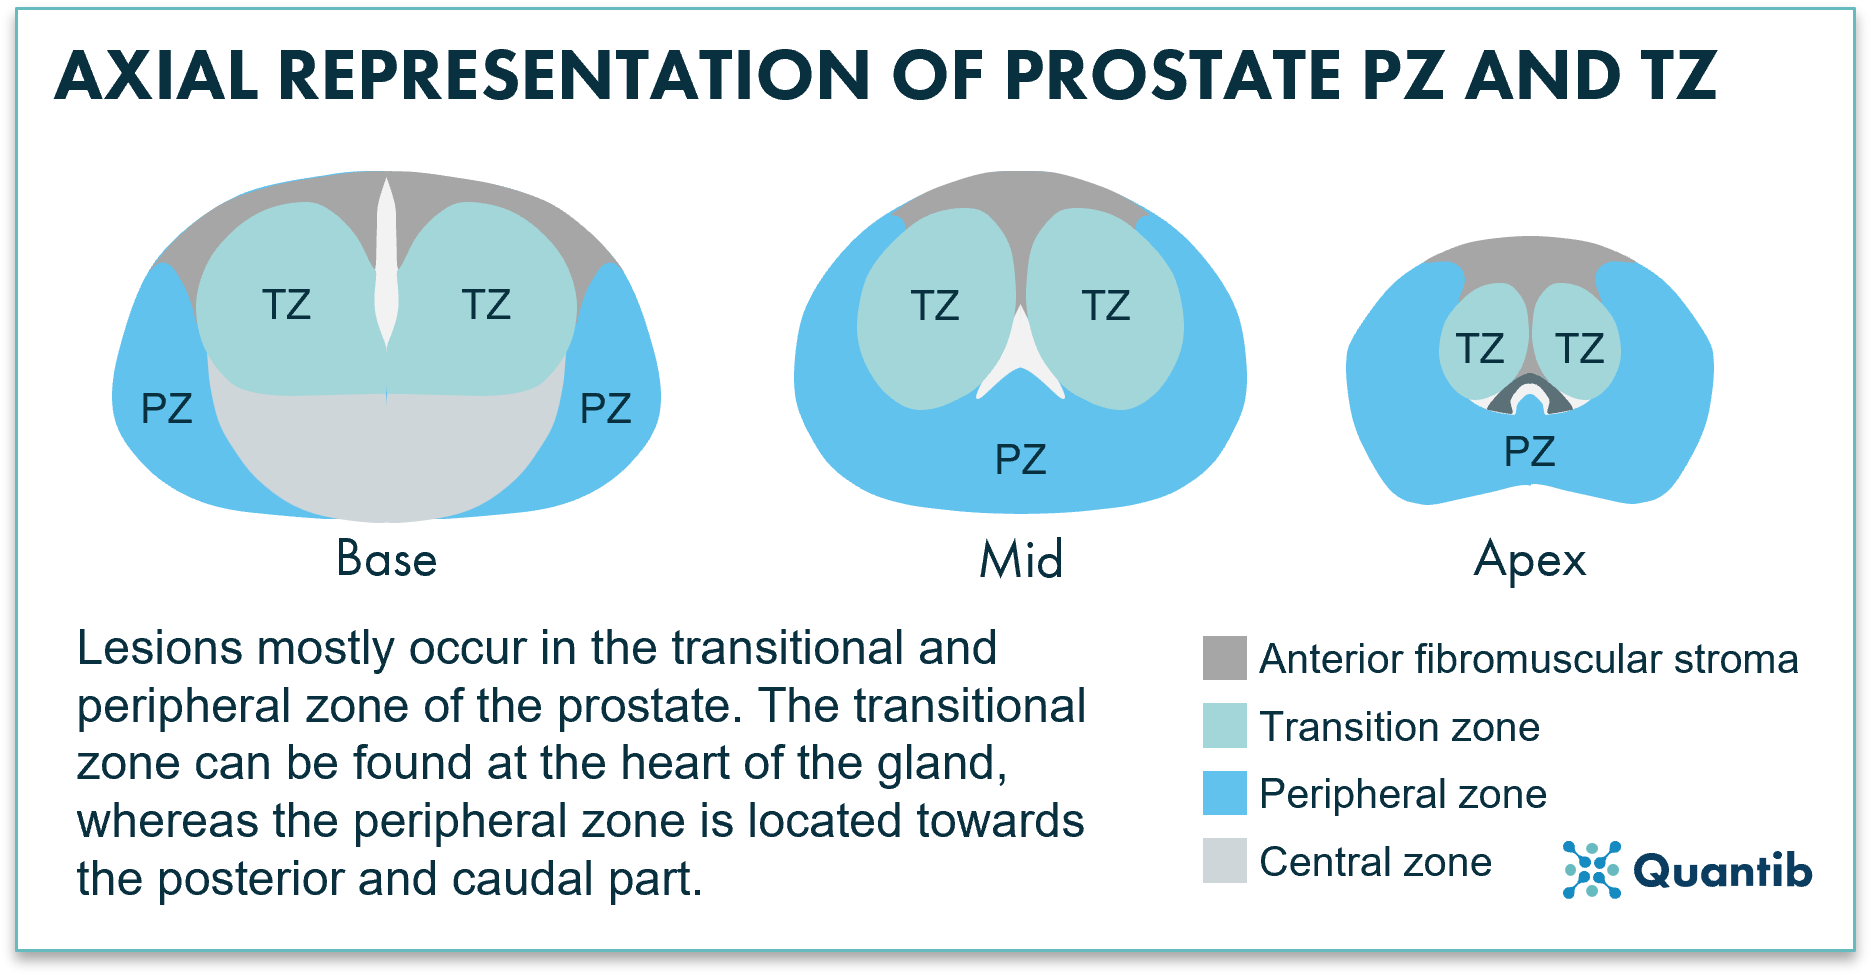 Axial representation of the prostate's peripheral and transition zones for PI-RADS scoring